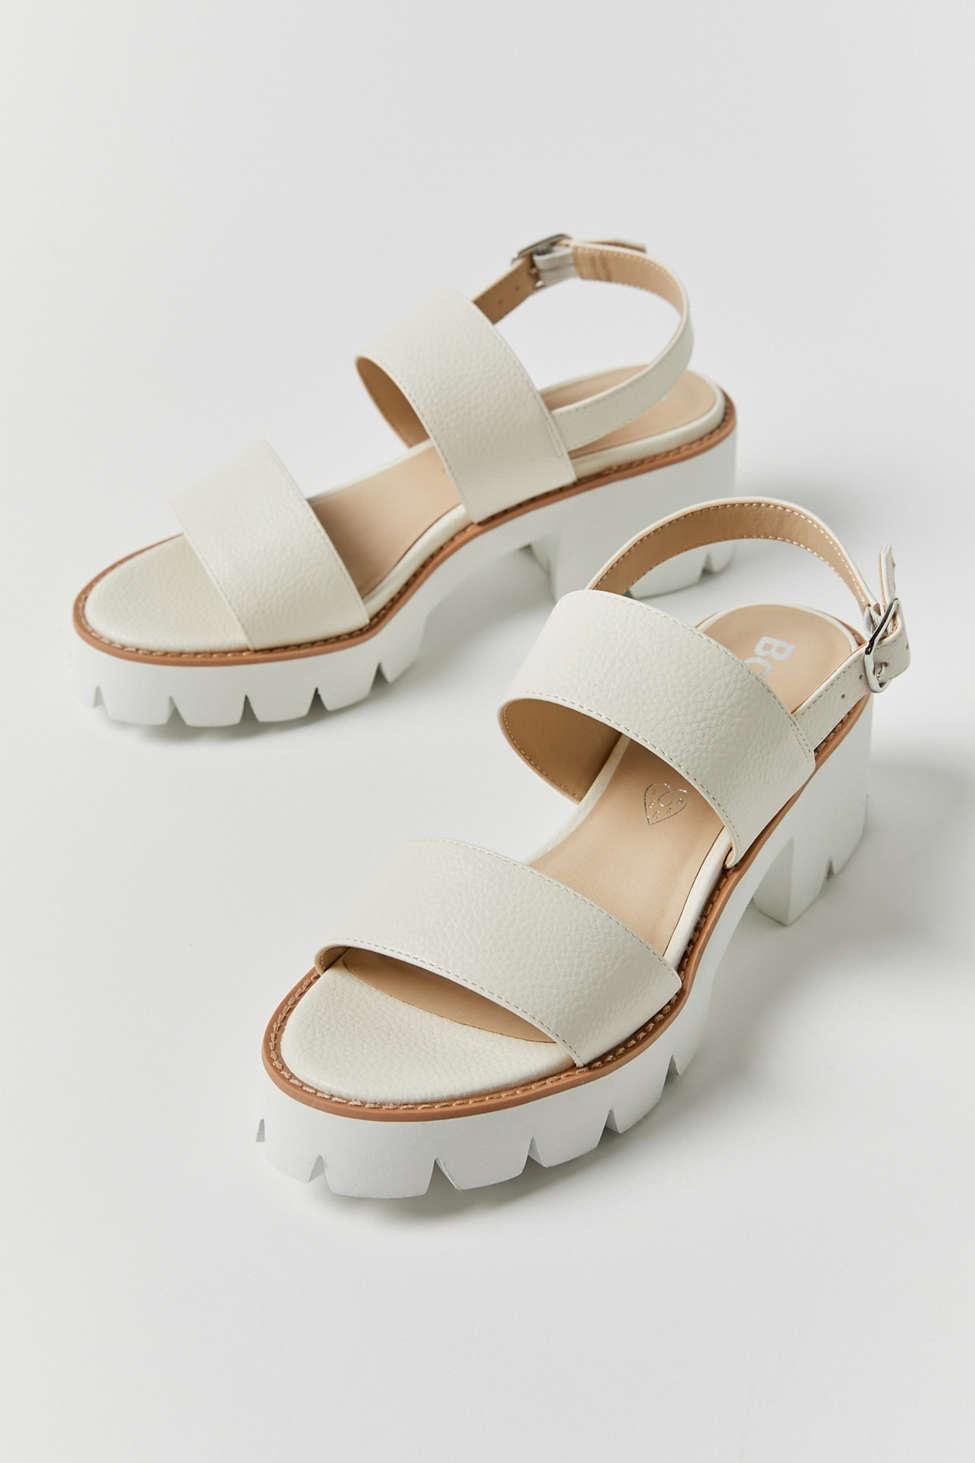 BC Footwear Left Unsaid Lug Sandal in Ivory (White) - Lyst